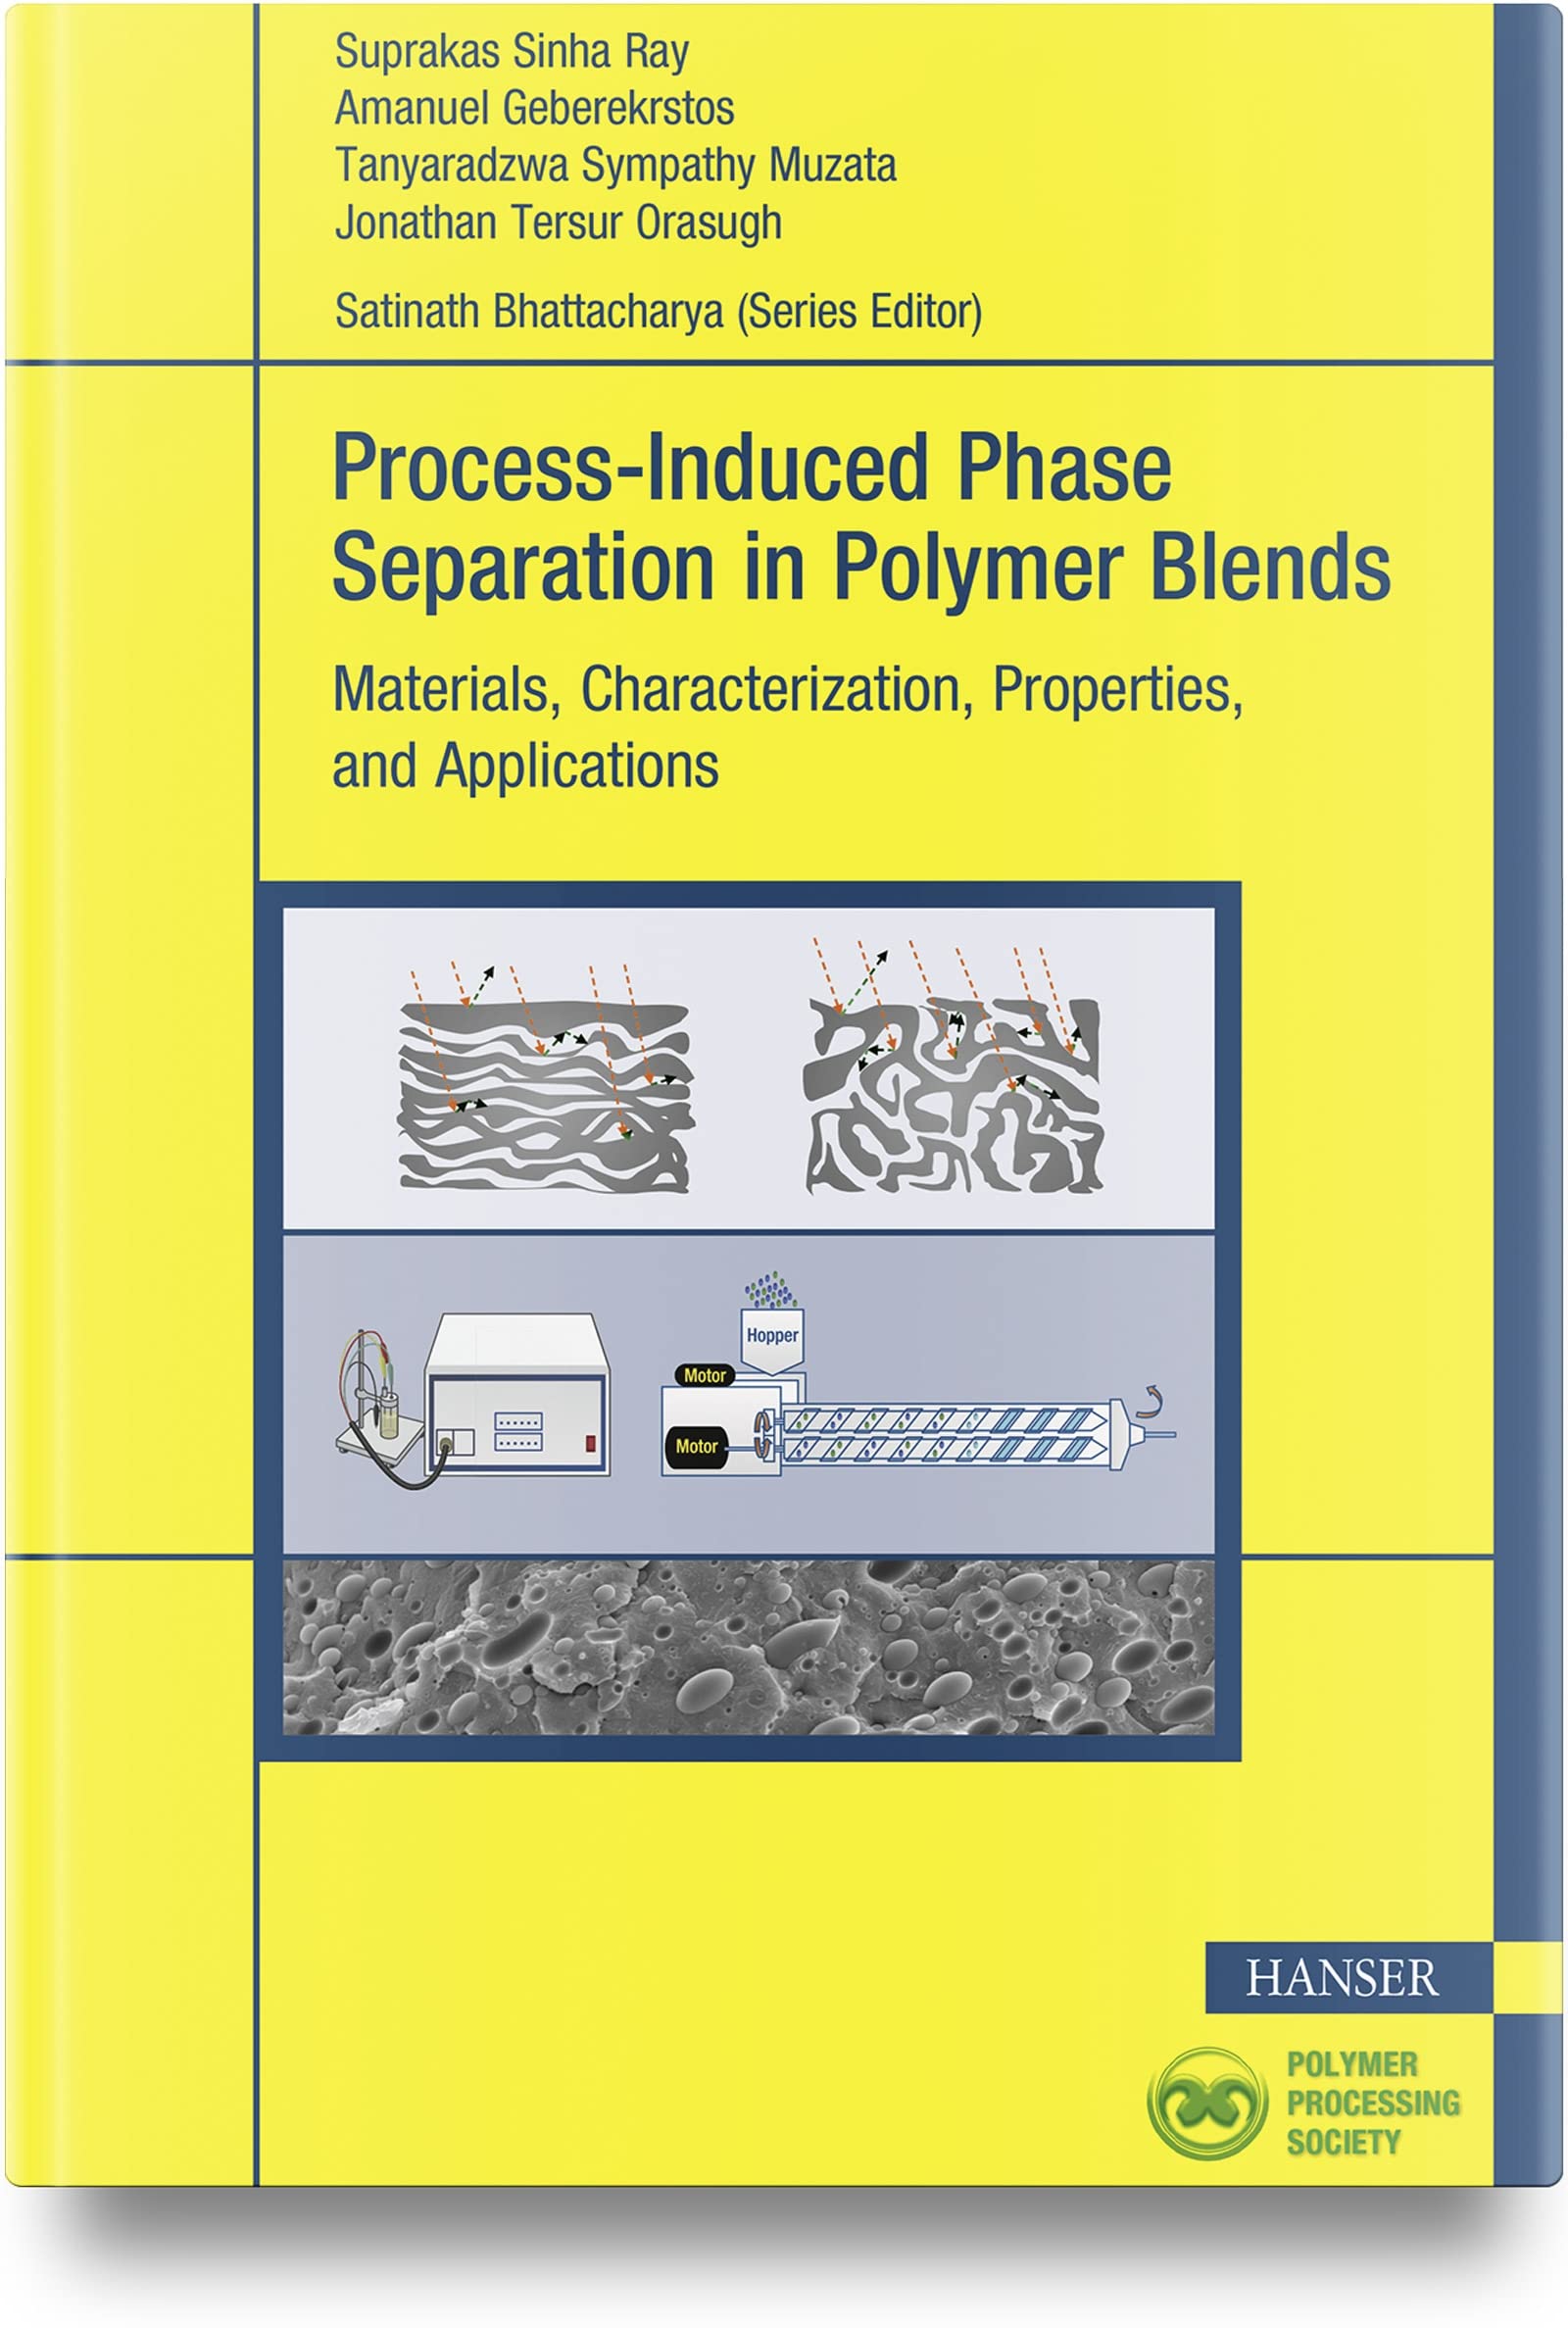 (DK   PDF)Process-Induced Phase Separation in Polymer Blends Materials, Characterization, Properties, and  by Suprakas Sinha Ray , Amanuel Geberekrstos 